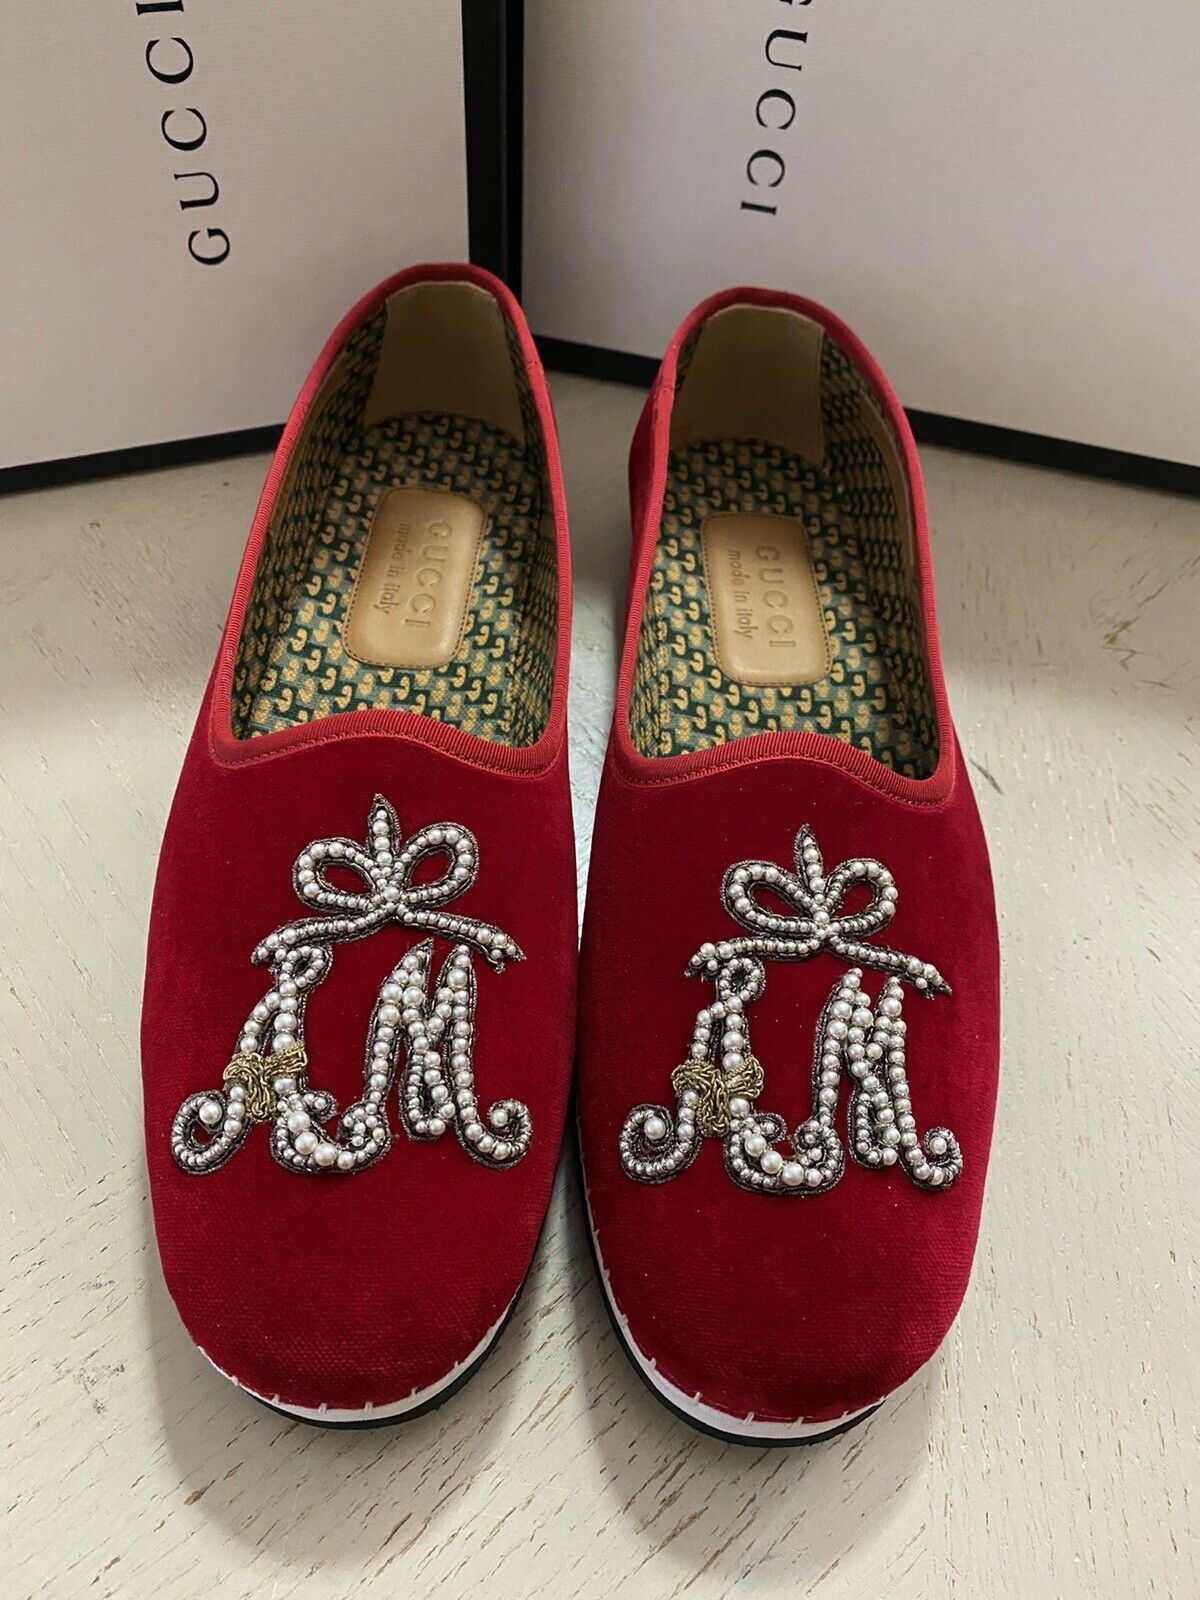 NIB $980 Gucci Mens Velvet Loafers Shoes Red 8 US / 7 UK